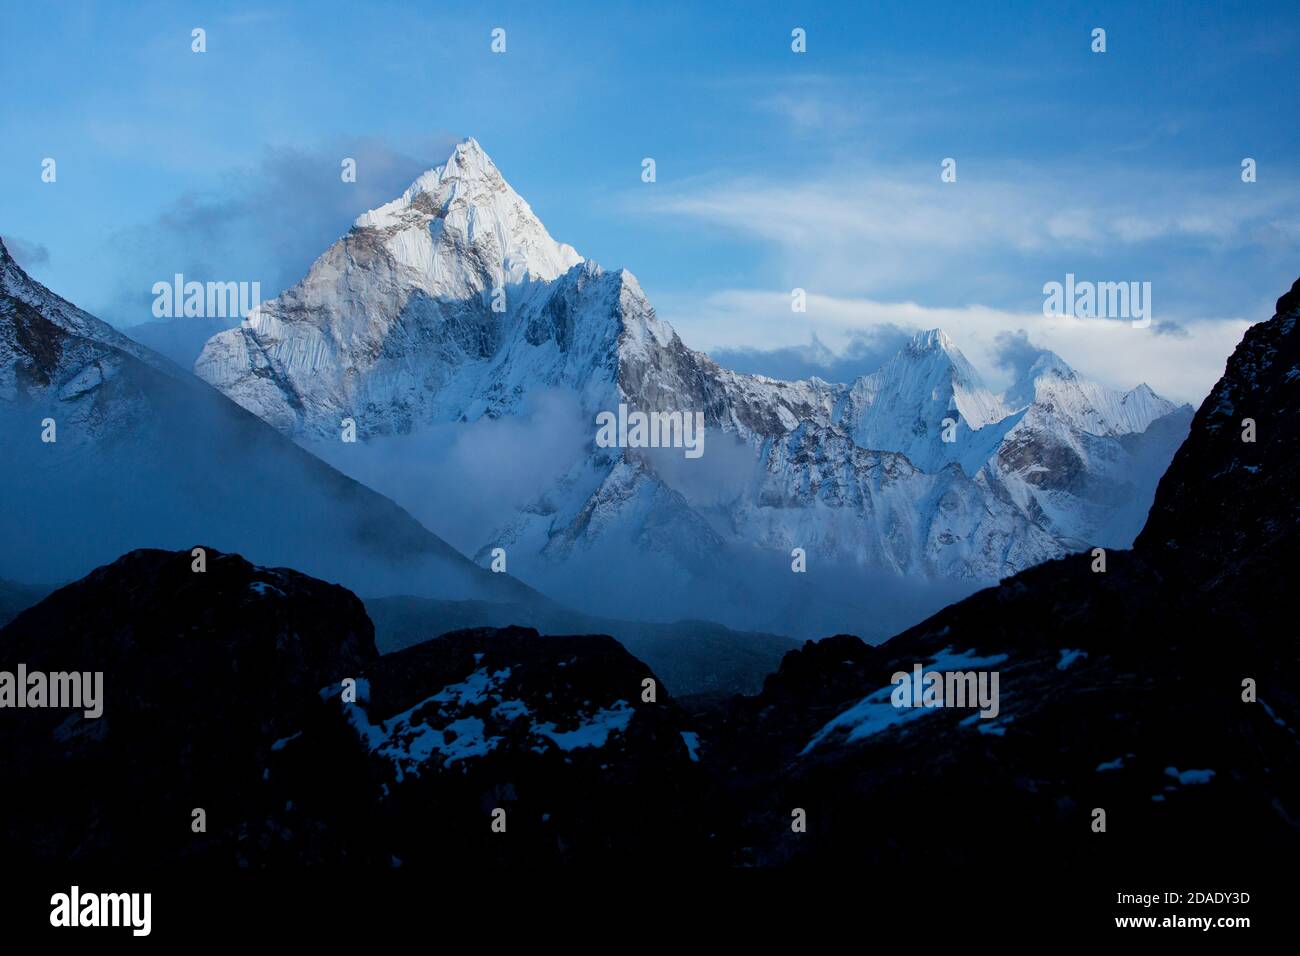 geography / travel, Nepal, Solo Khumbu, Ama Dablam, Additional-Rights-Clearance-Info-Not-Available Stock Photo